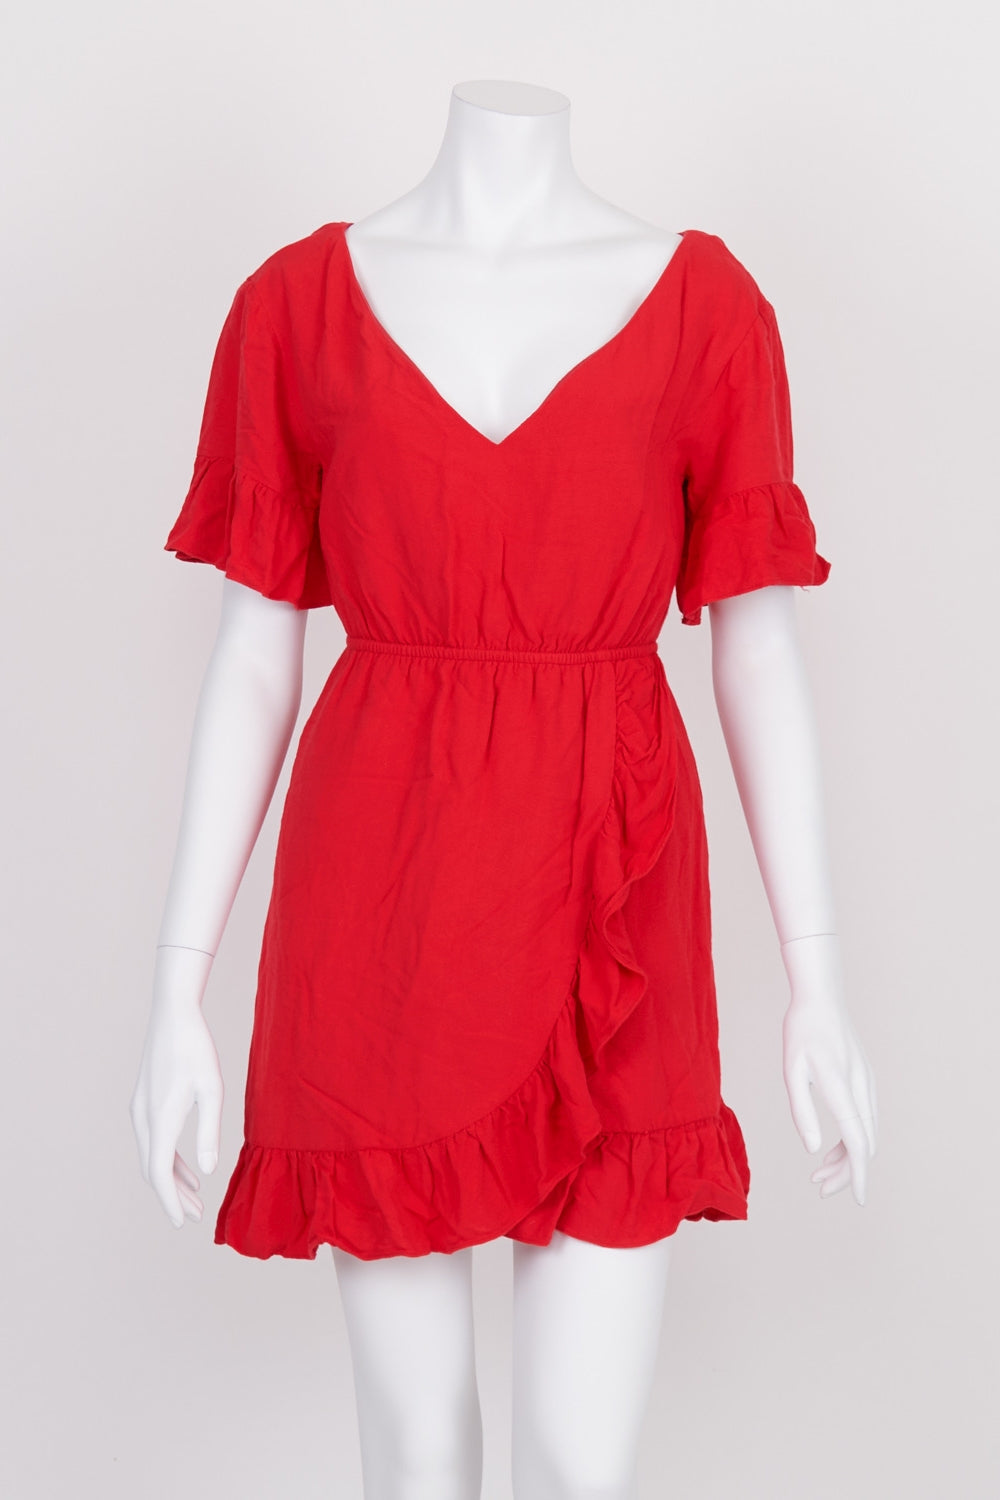 Sabo Luxe Red Wrap Dress XS